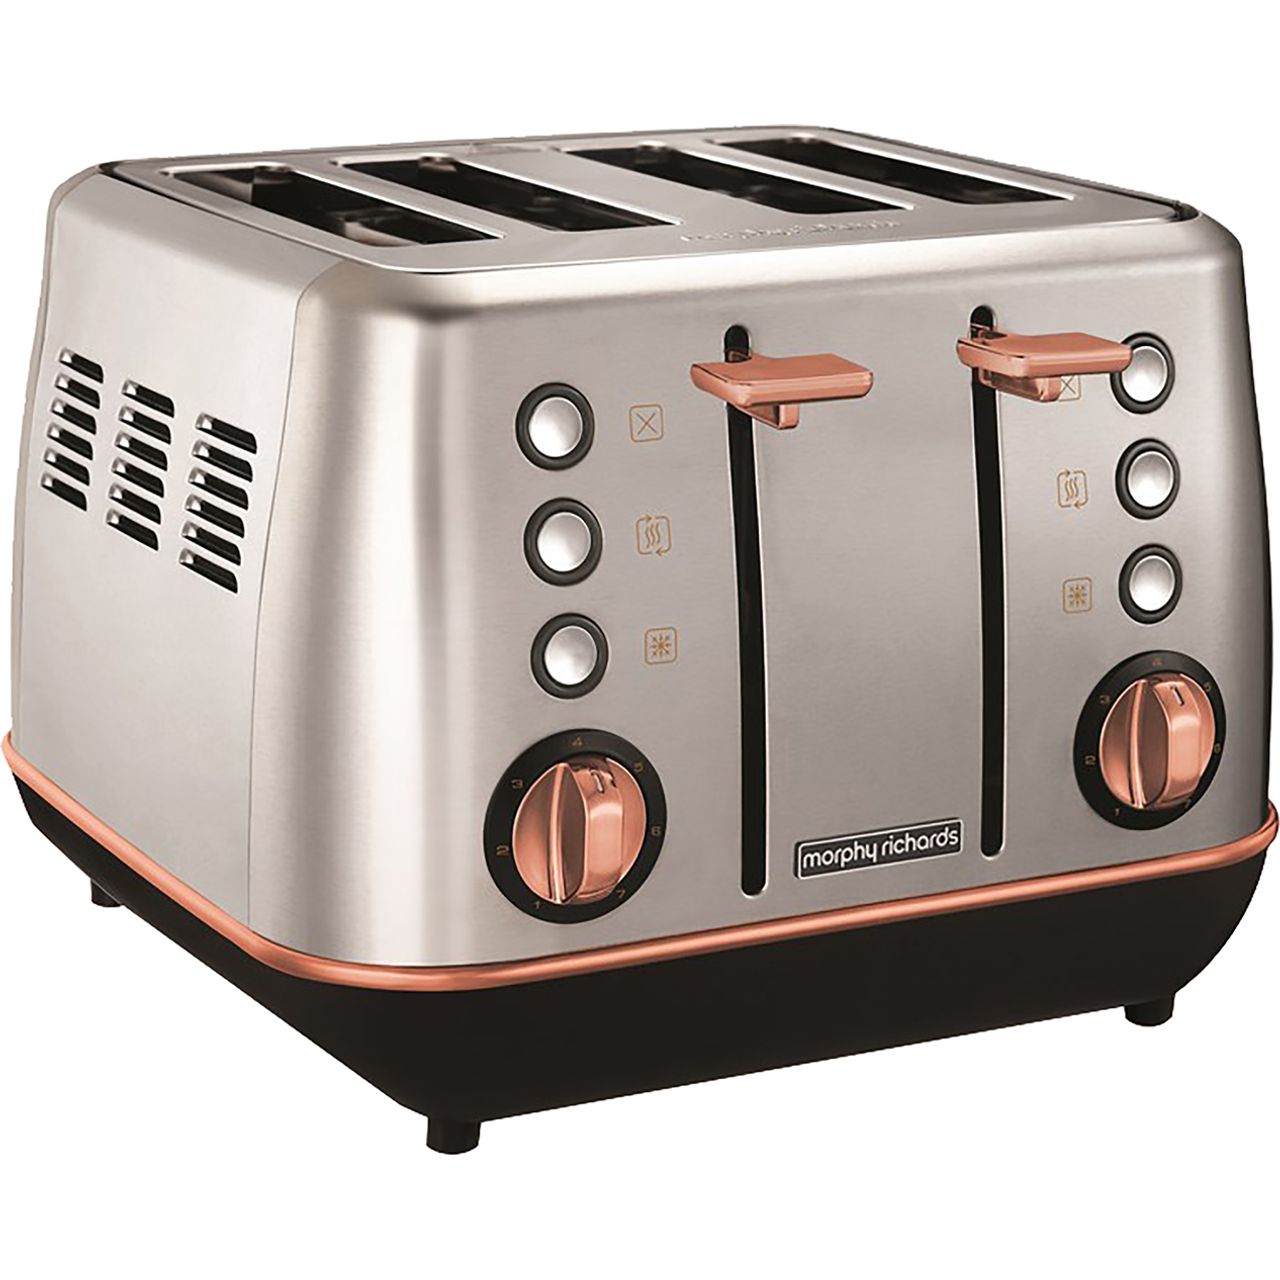 Morphy Richards Evoke Special Edition 240116 4 Slice Toaster Review